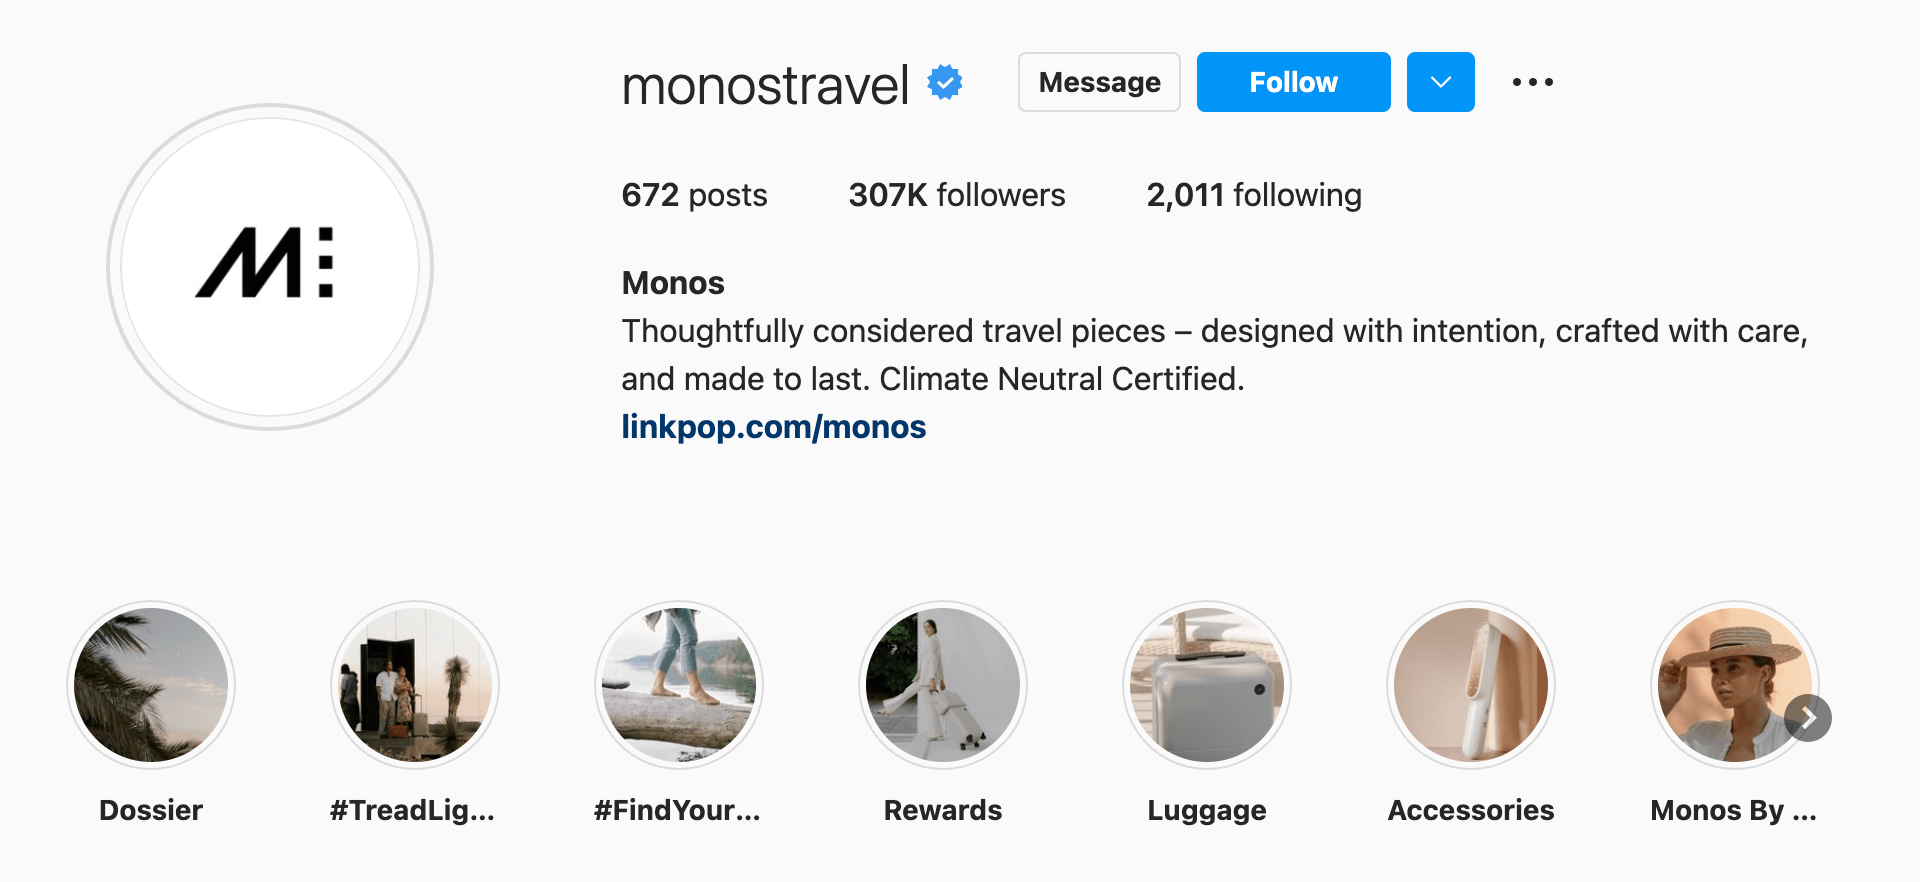 monos instagram page with icons for various highlights of luggage brand